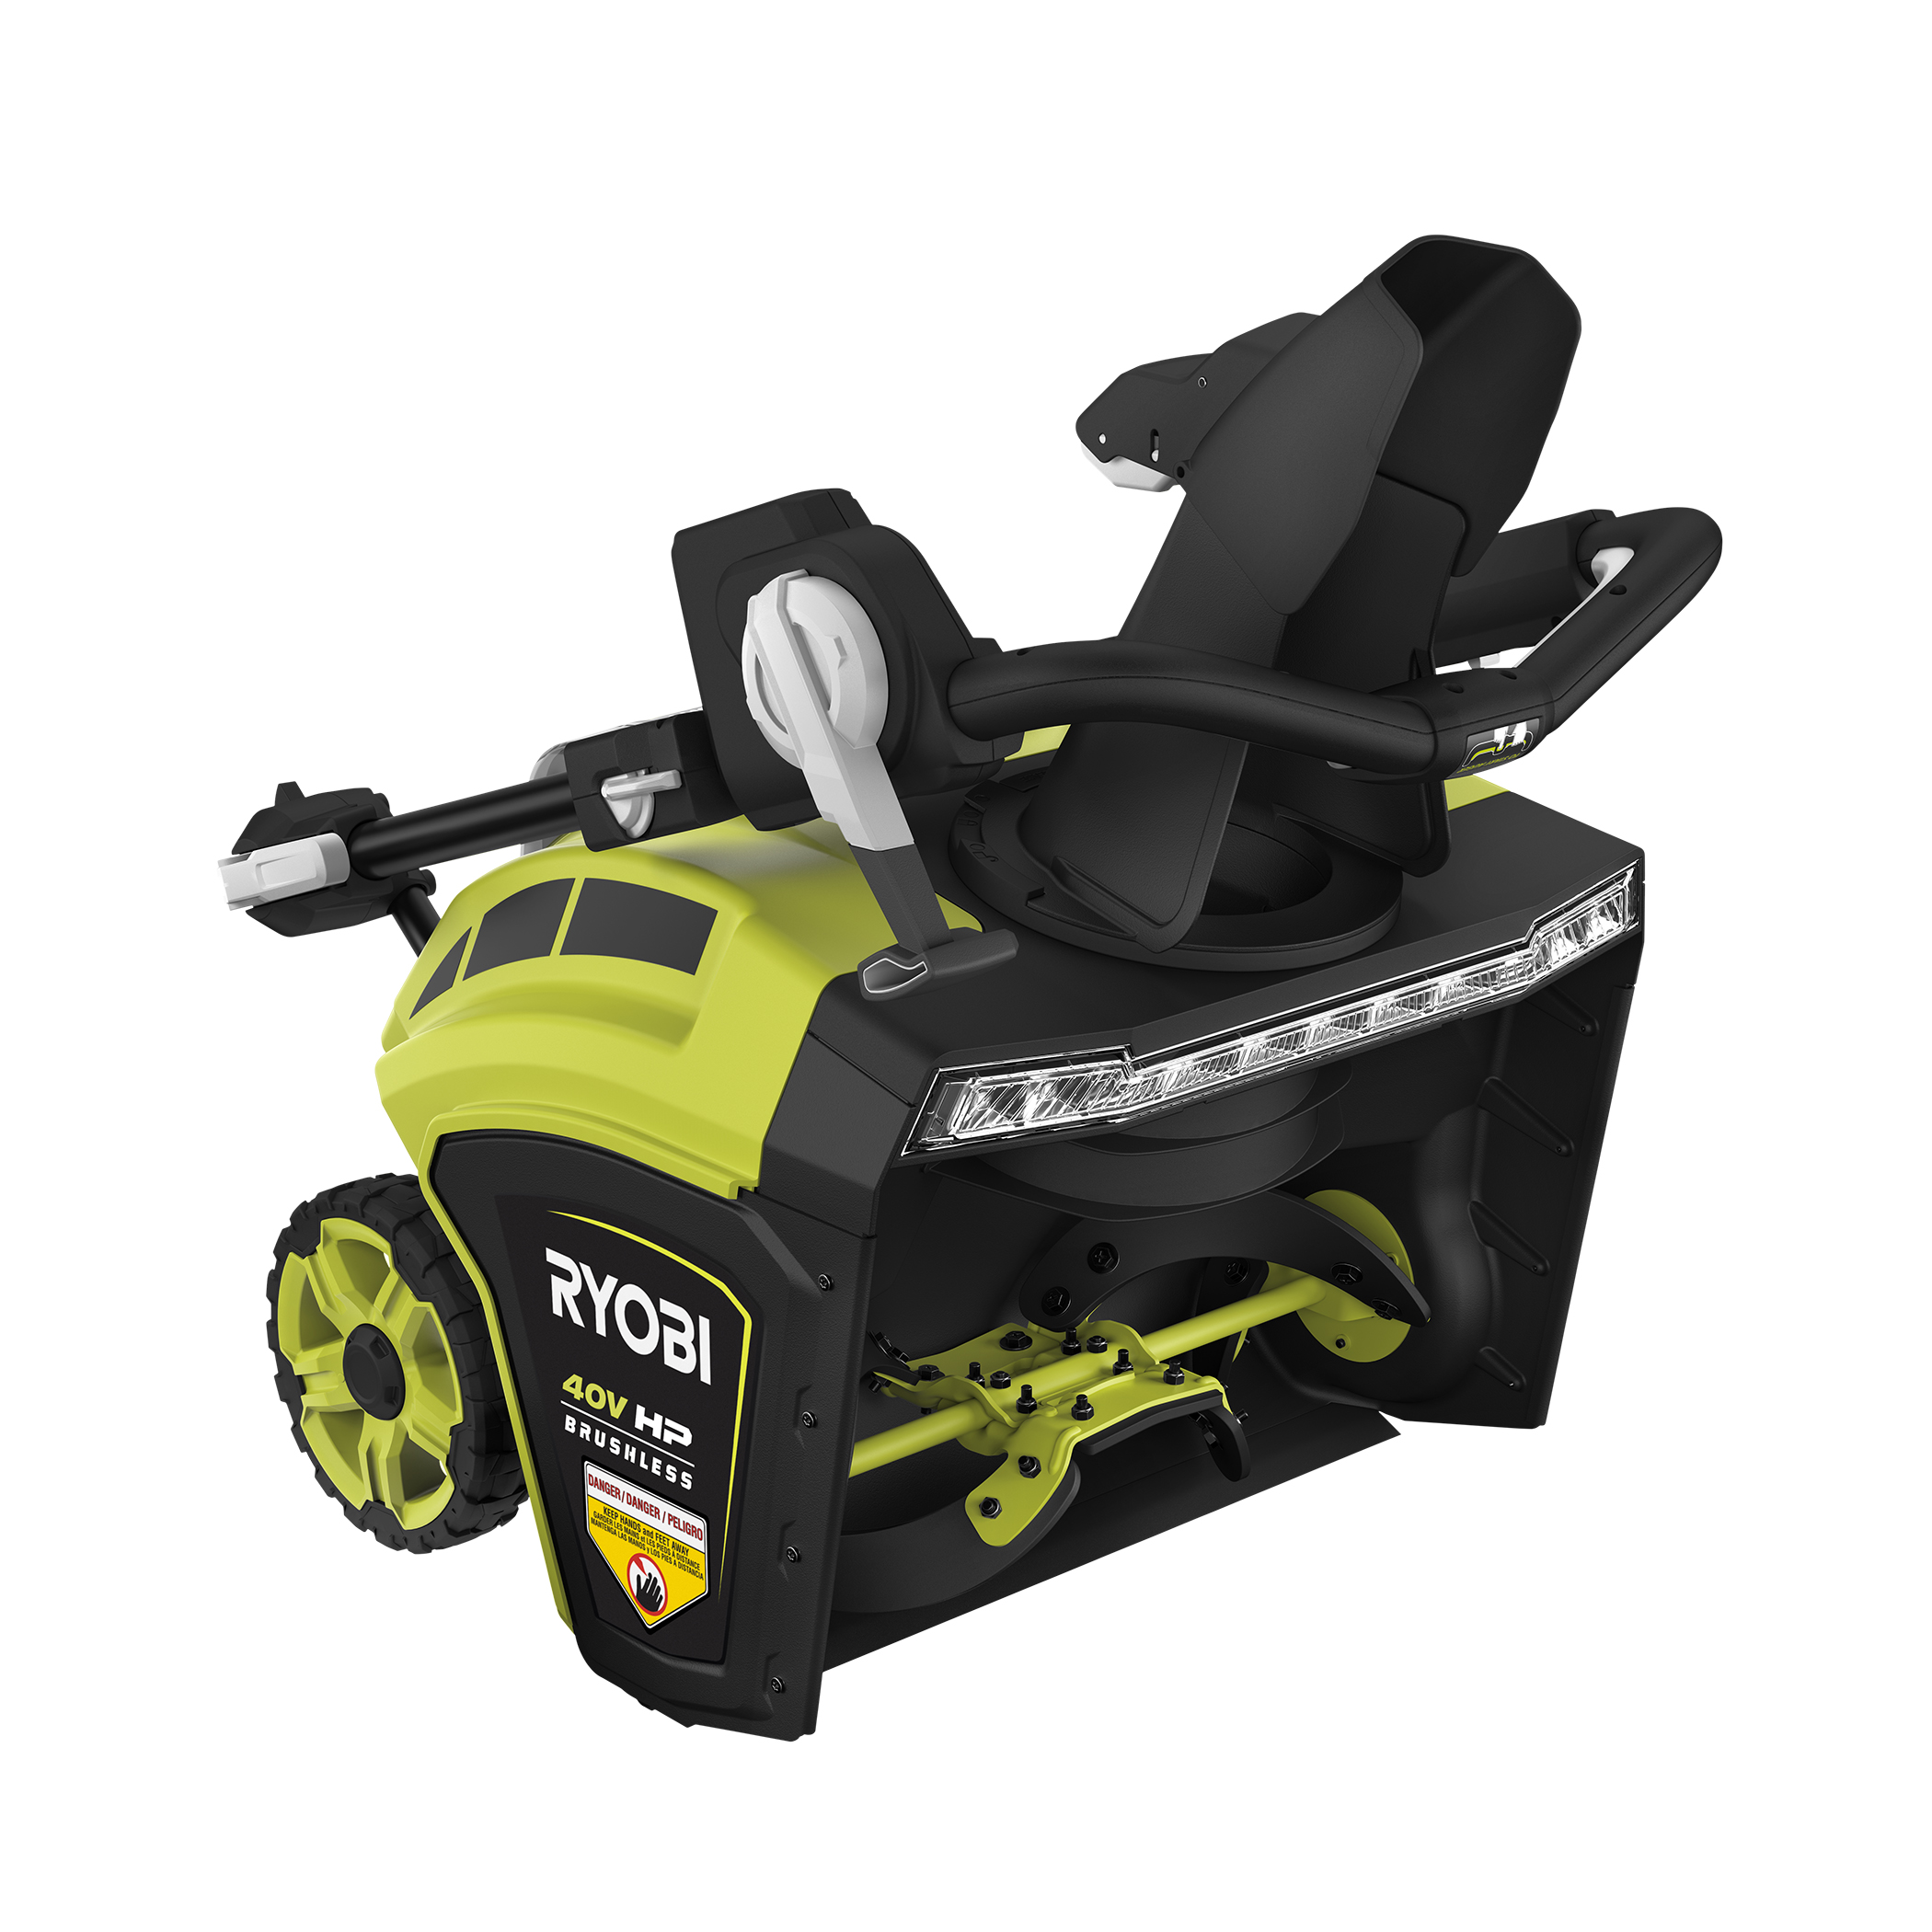 BLACK+DECKER - Try the NEW! 40V MAX* Lithium 21 In. Brushless Snow Thrower.  21 In. clearing path allows for a fast, efficient snow removal. Check it  out, here